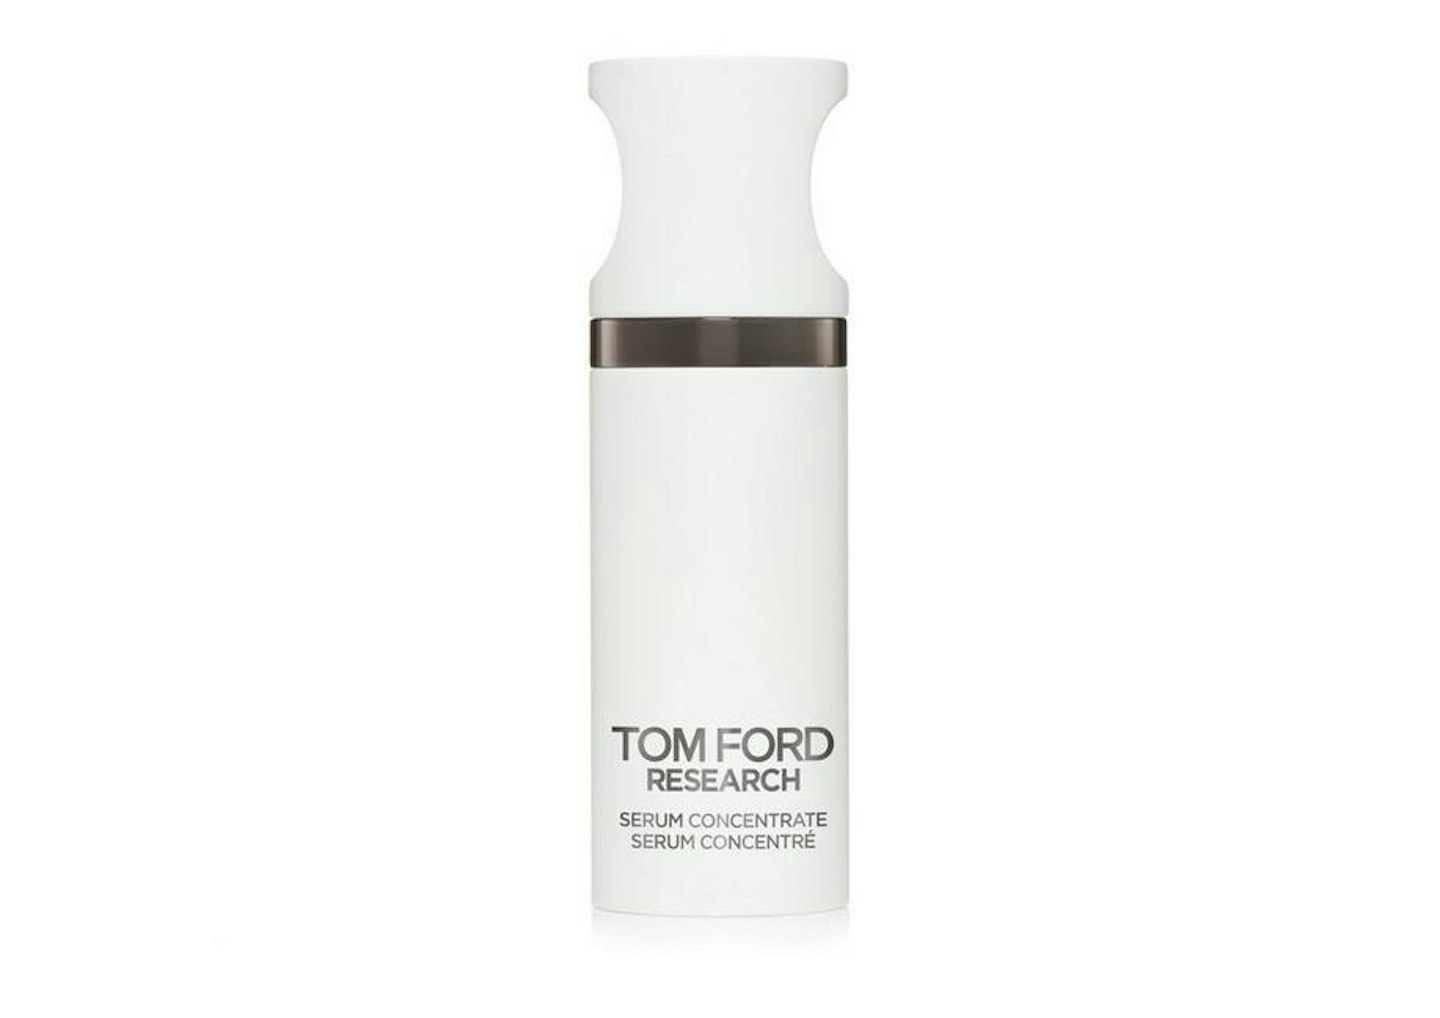 Tom Ford Research Serum Concentrate, £255